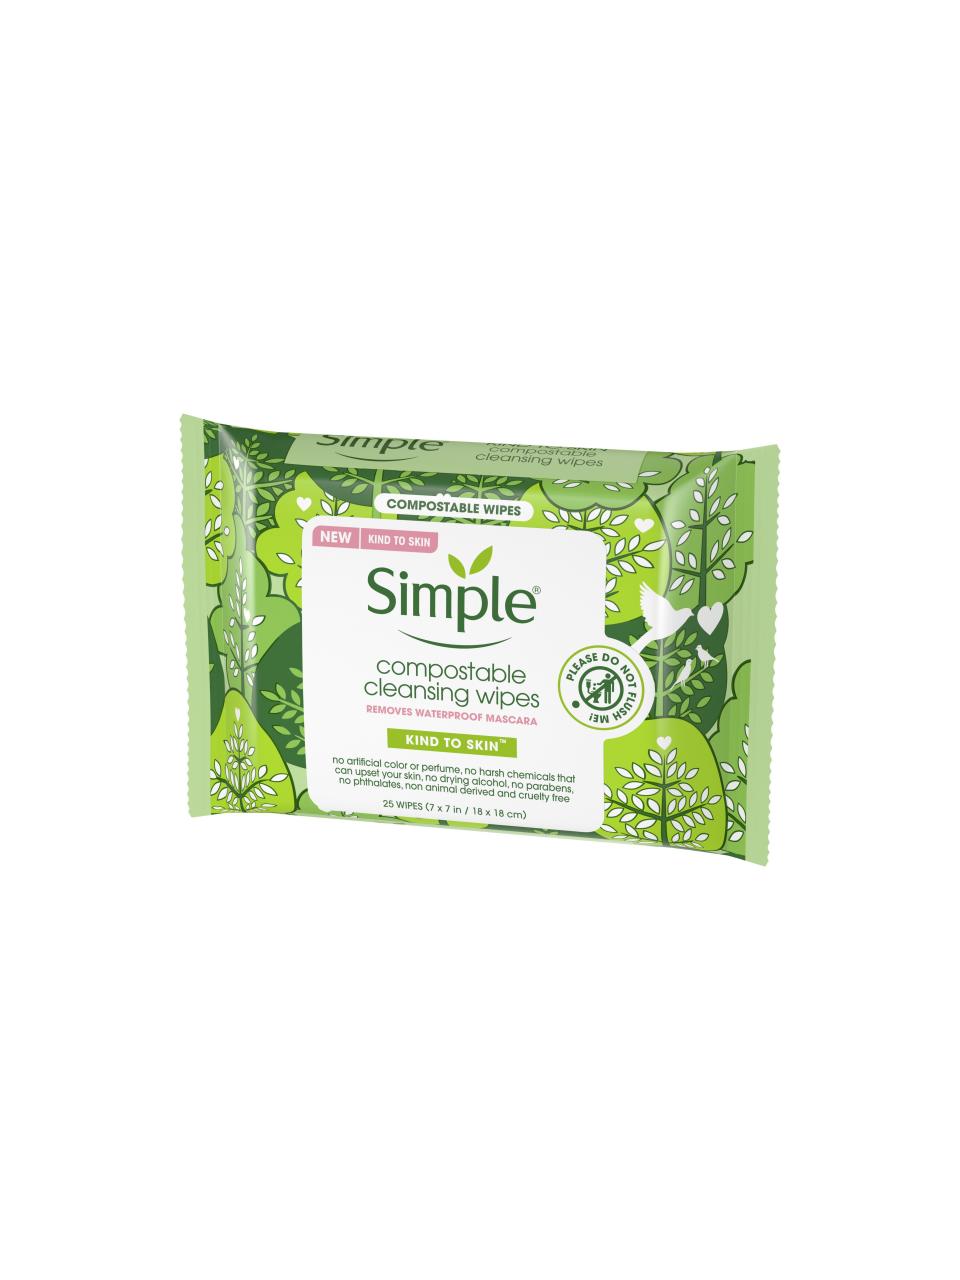 Compostable Cleansing Wipes